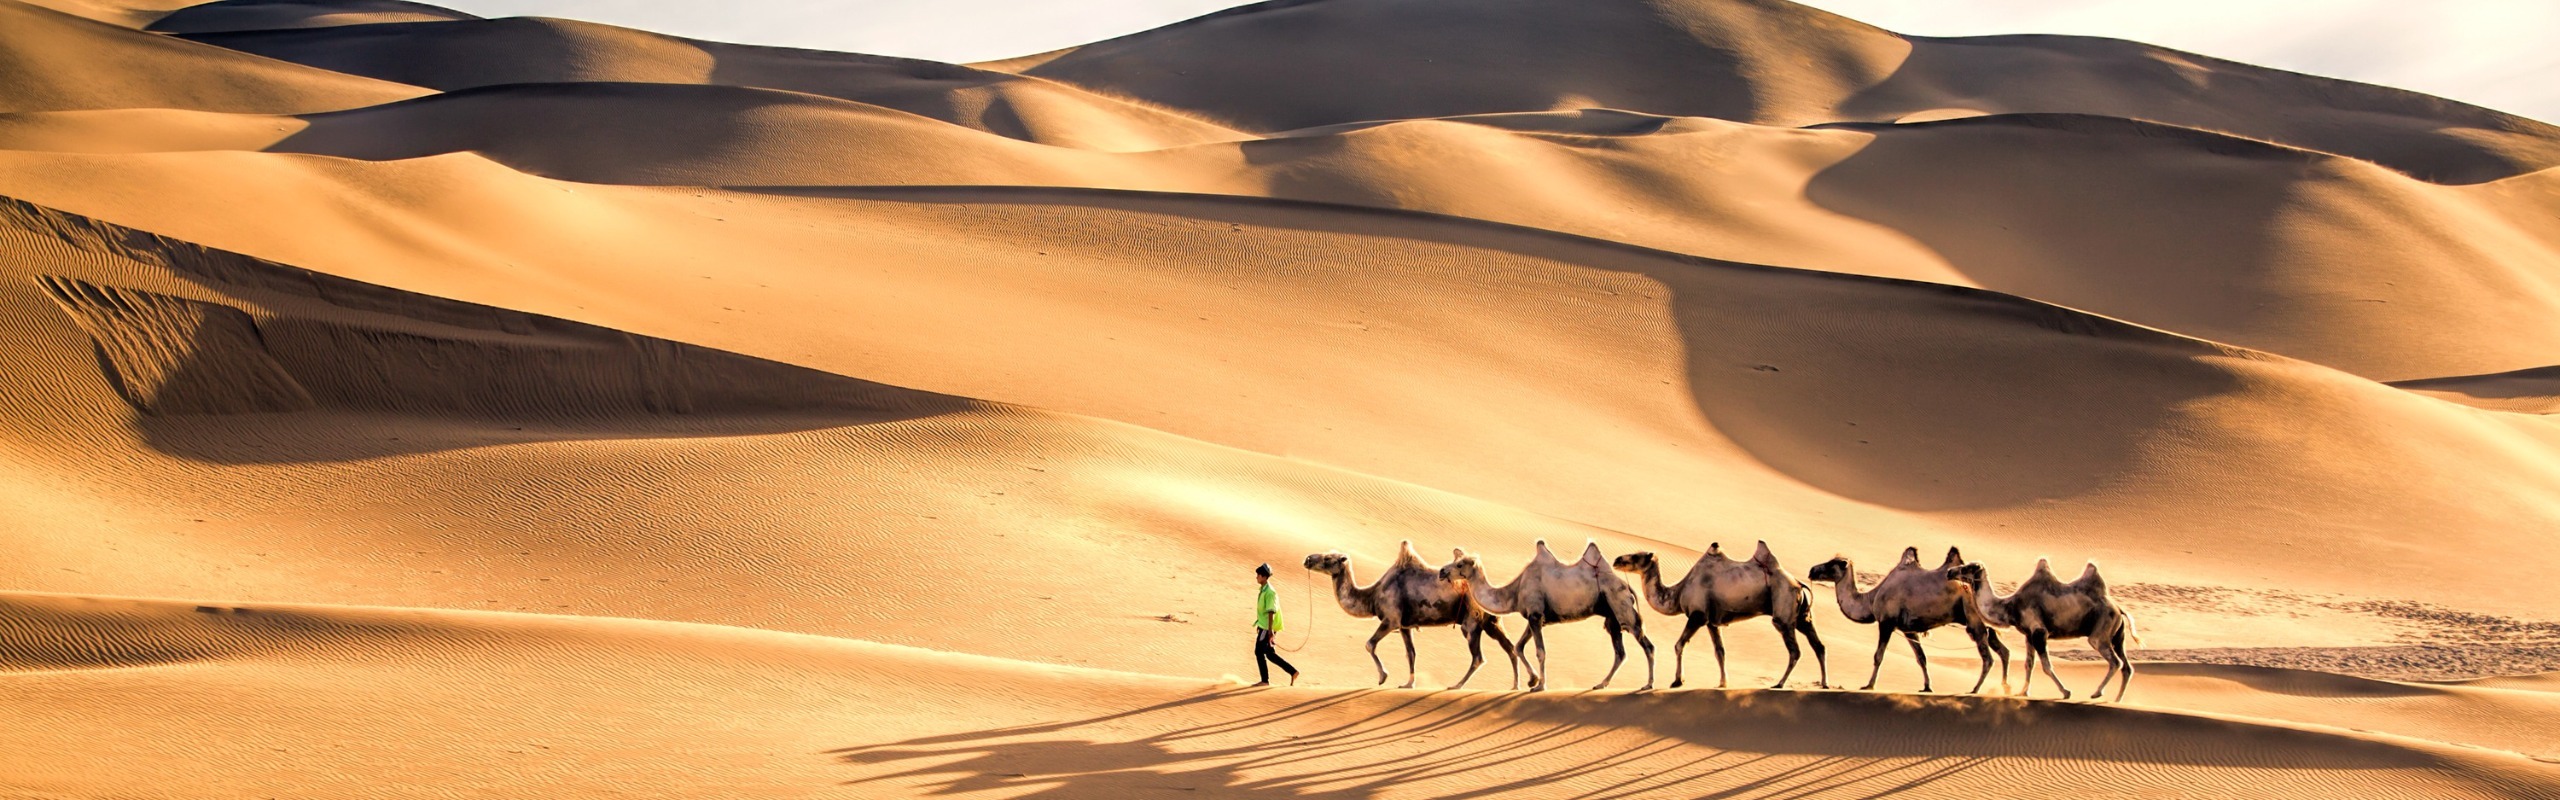 21-Day Silk Road Tour from China to Central Asia